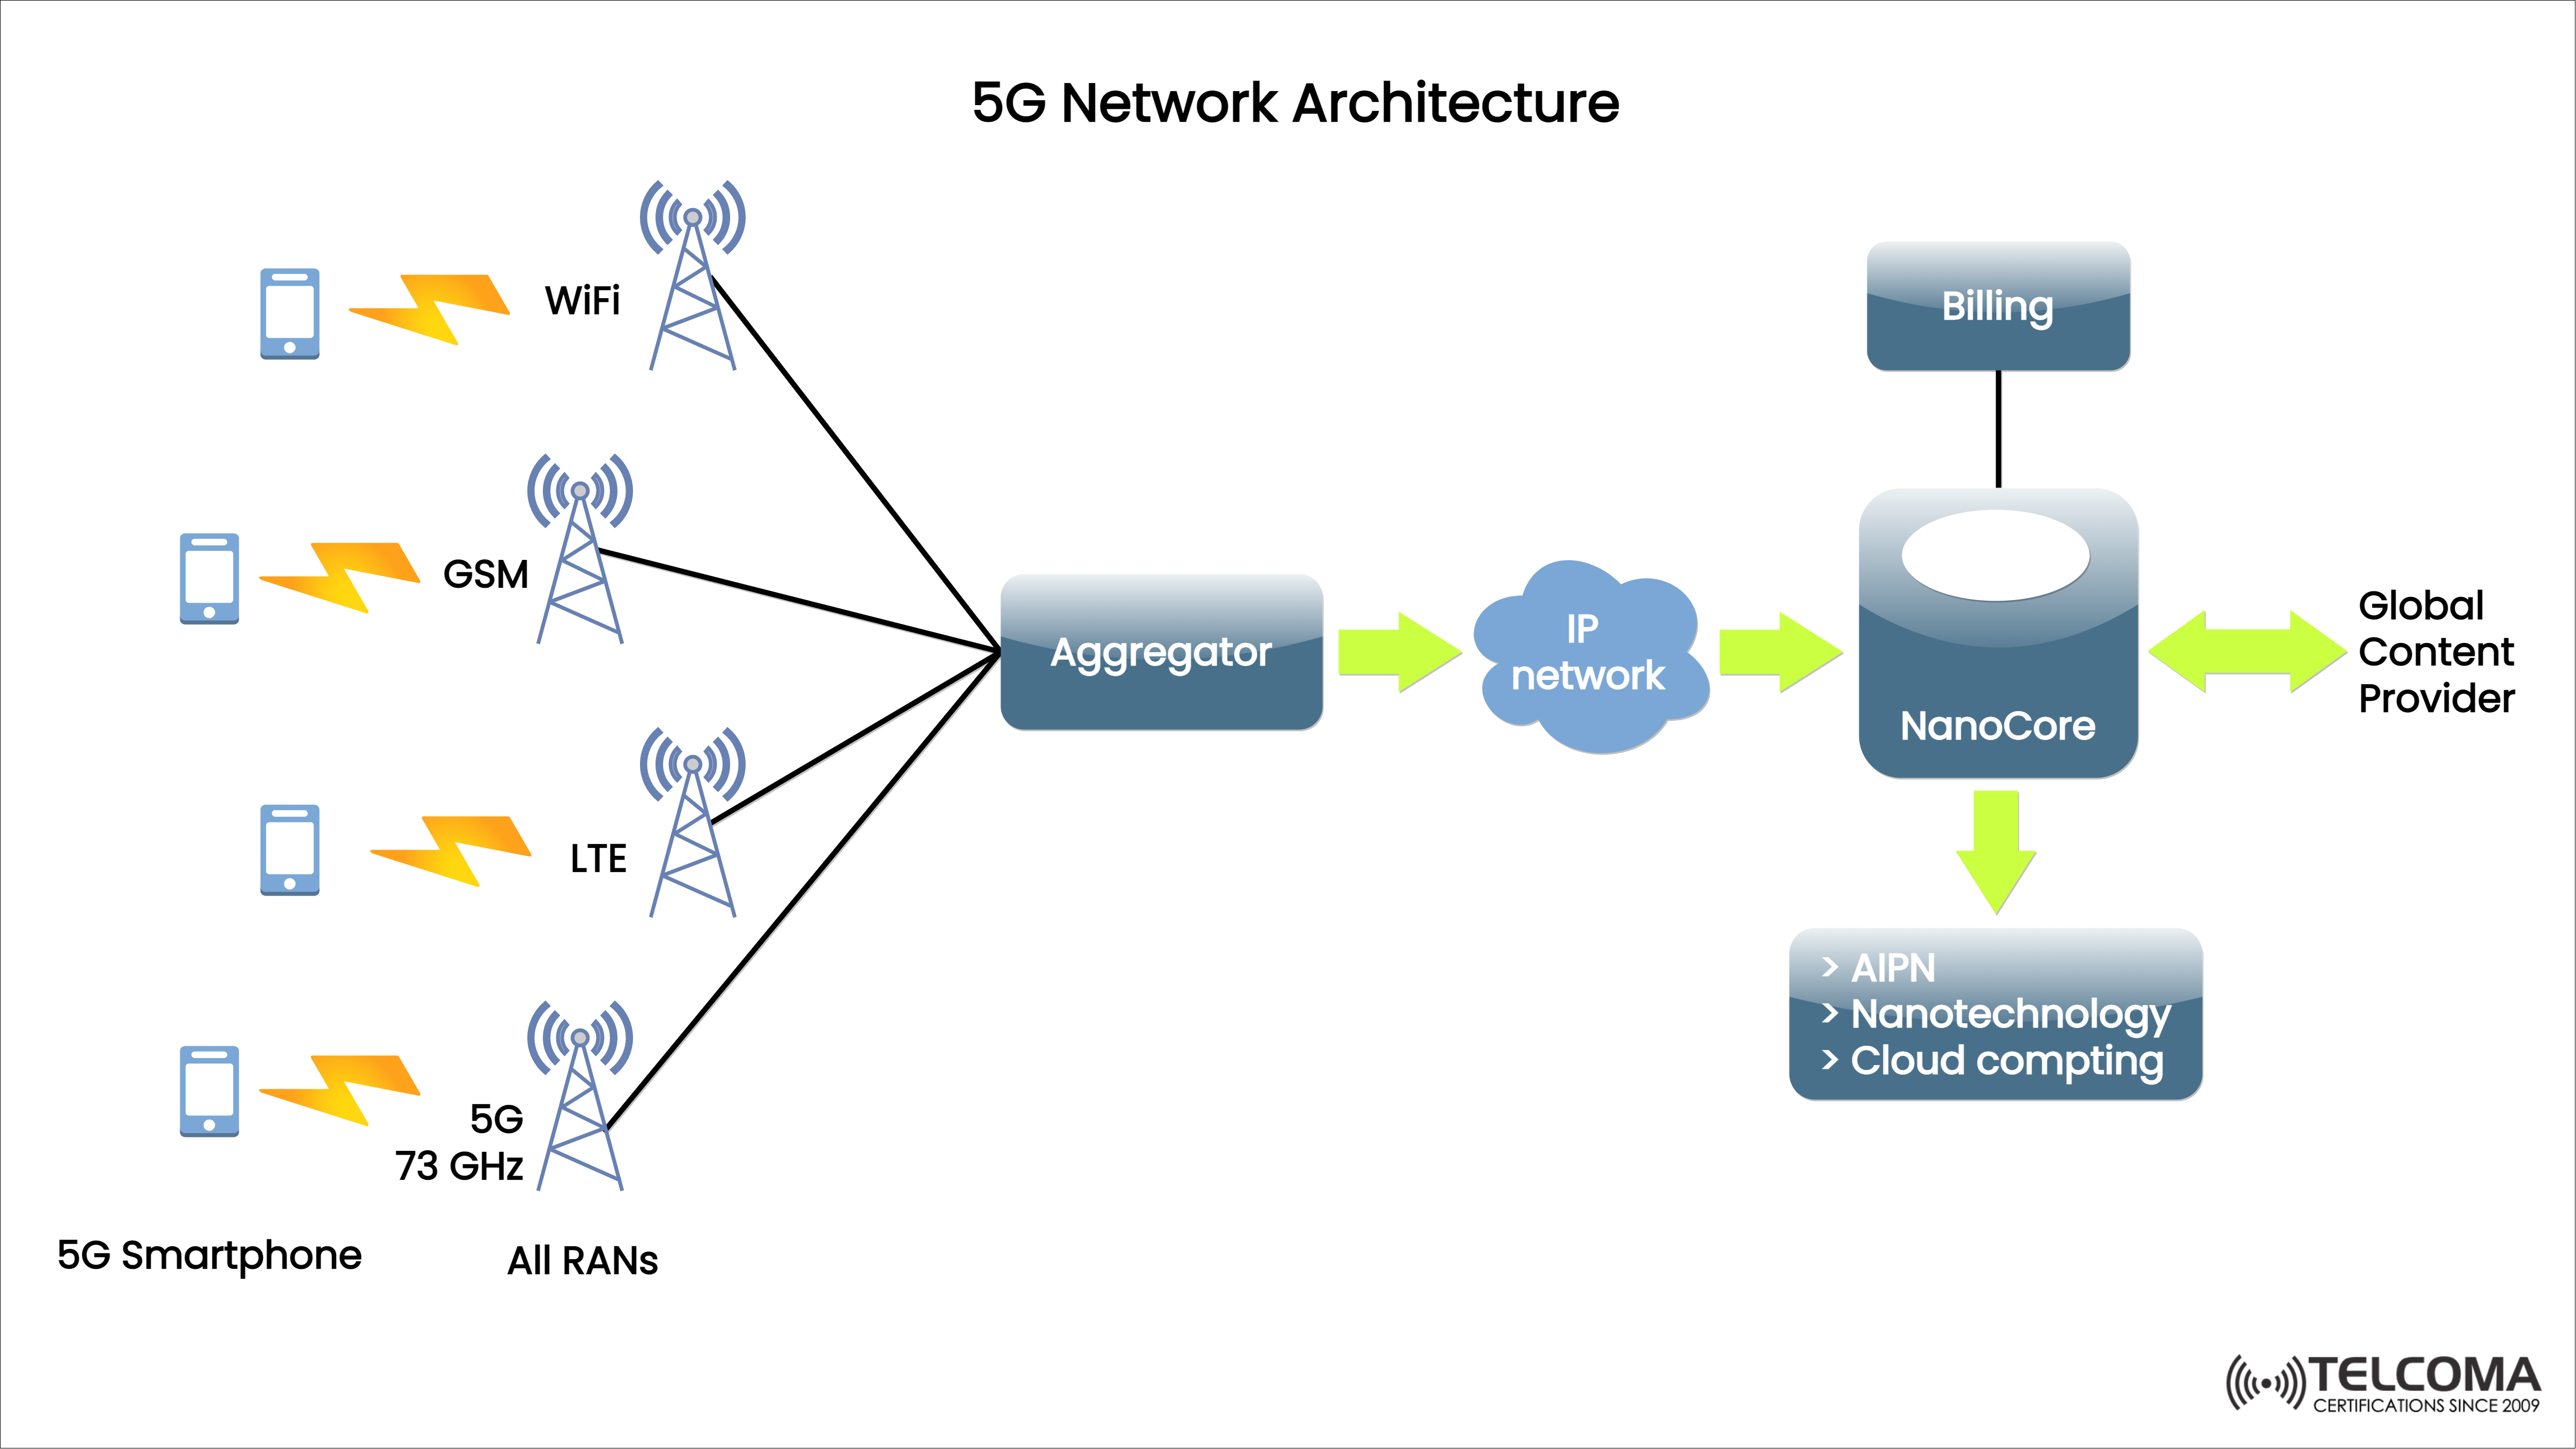 5G Network Architecture for certification